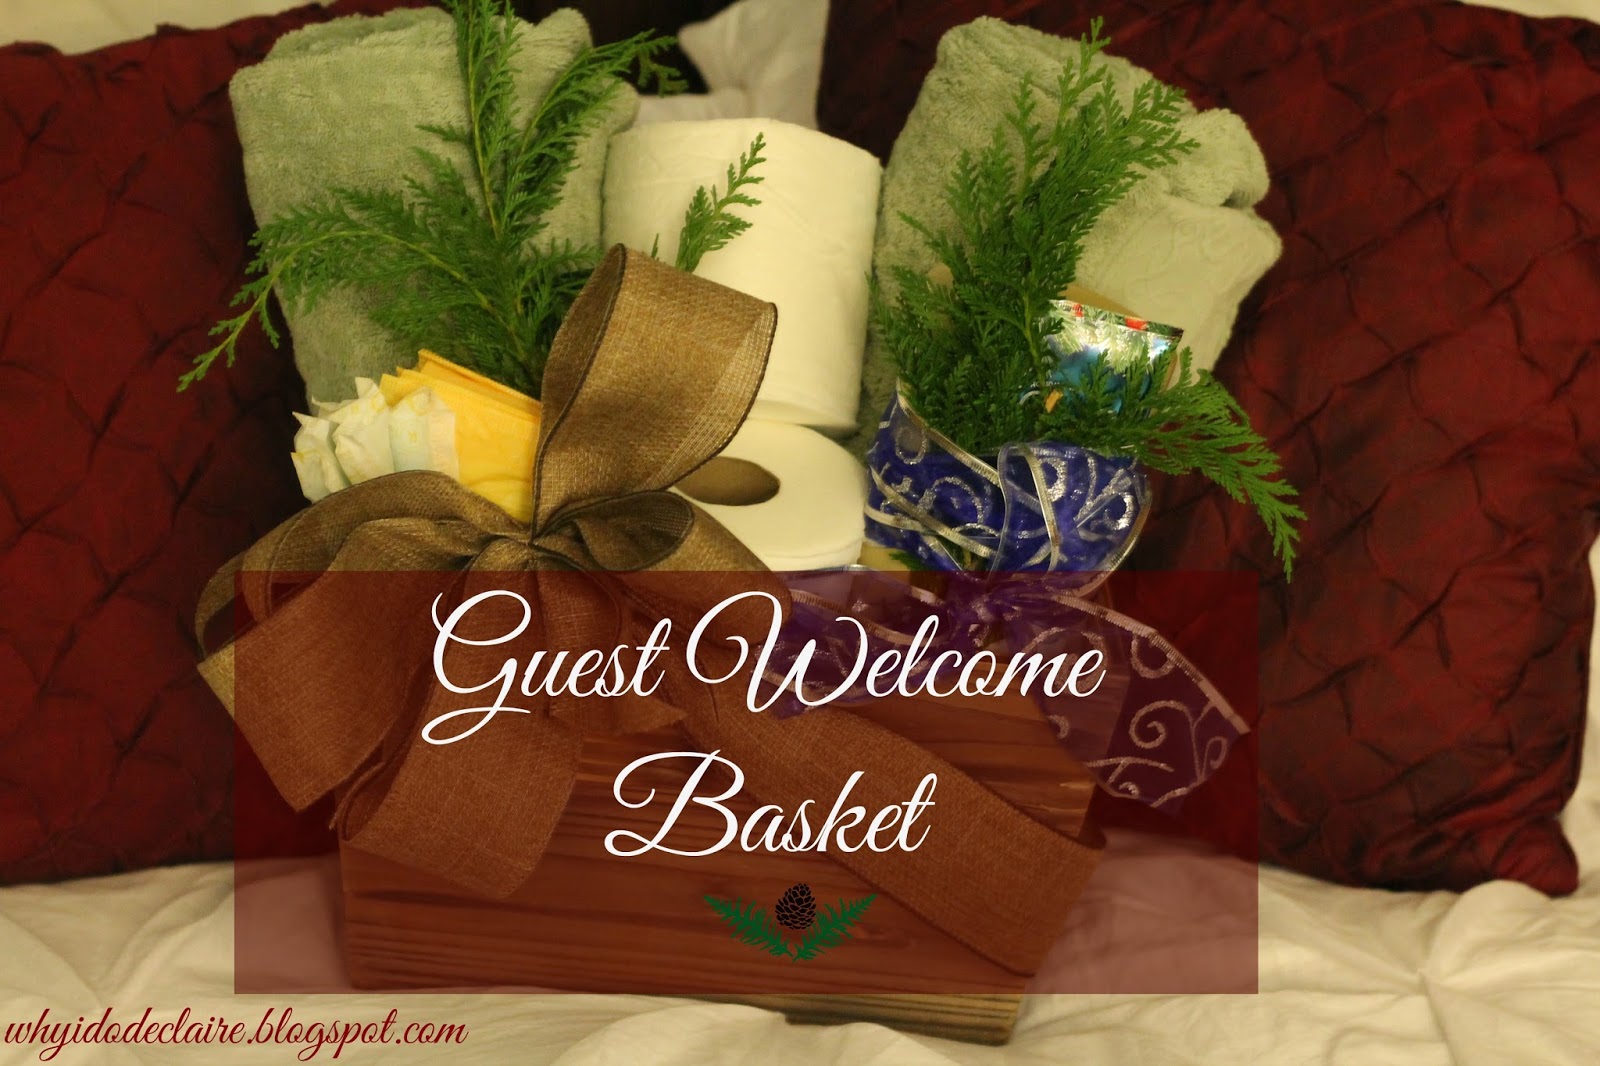 How to Make Your Guests Feel at Home During the Holidays